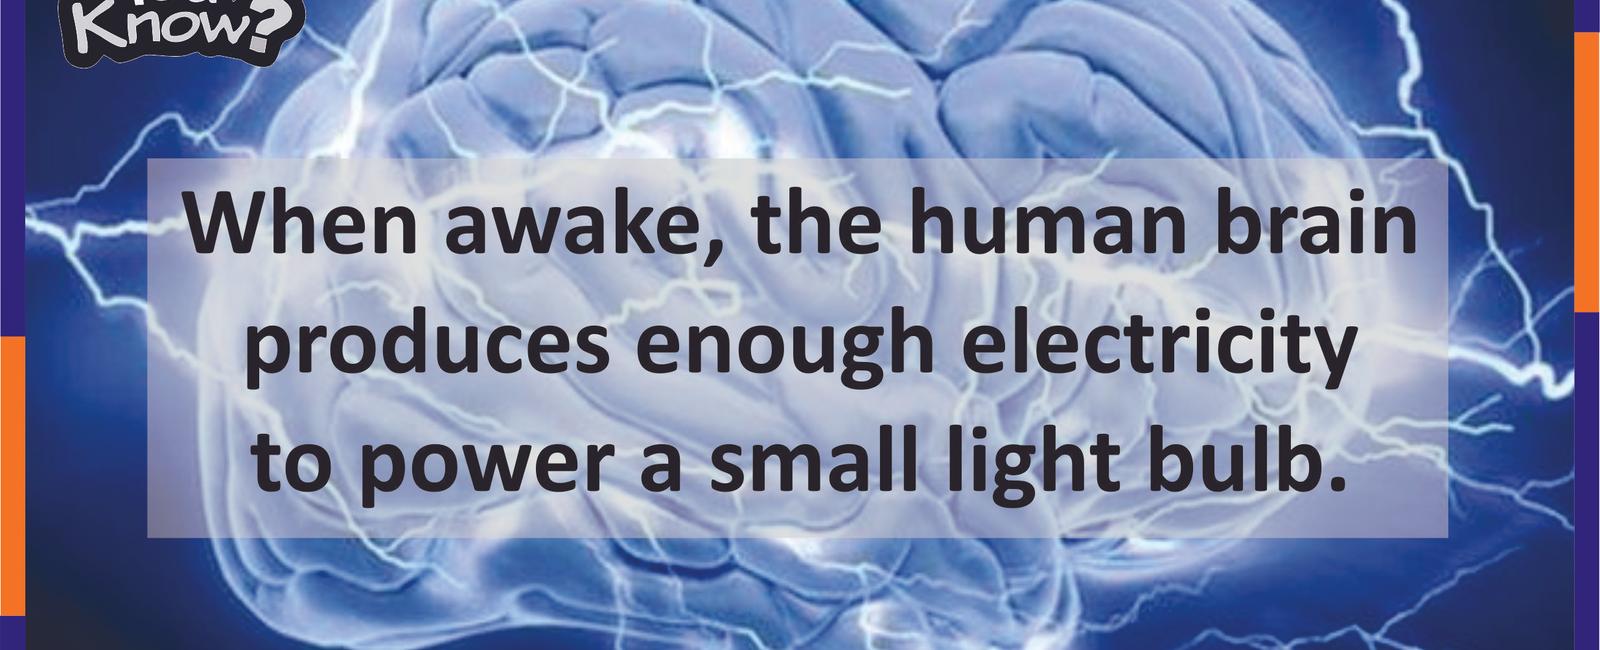 Your brain generates enough electricity to power a lightbulb